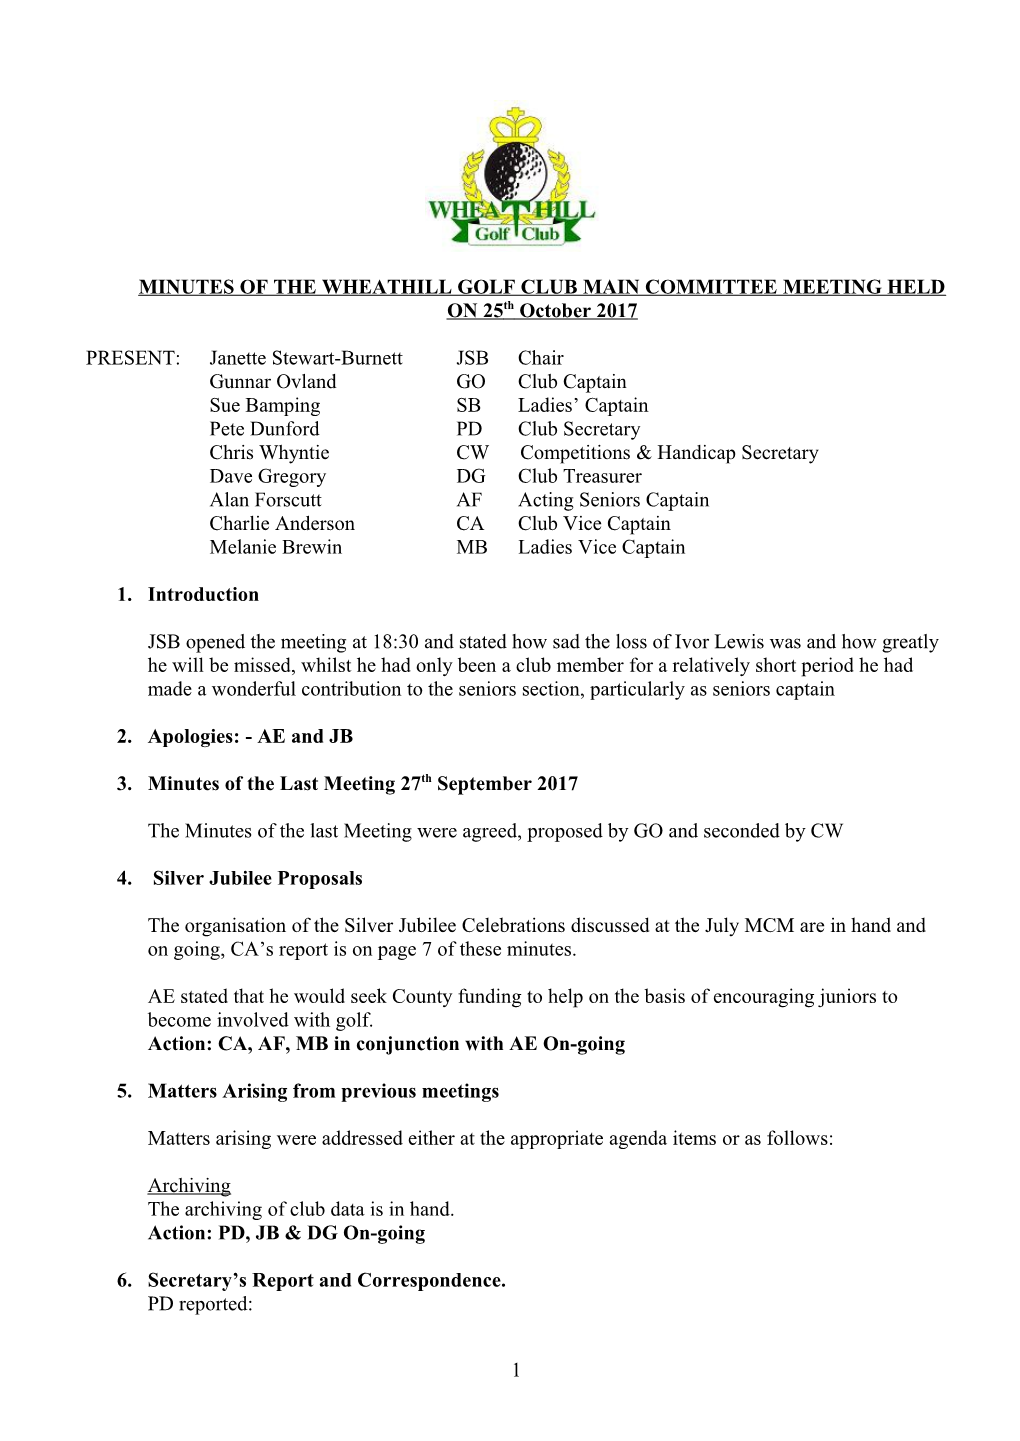 Minutes of the Wheathill Golf Club Playing Committee 13 Feb 13